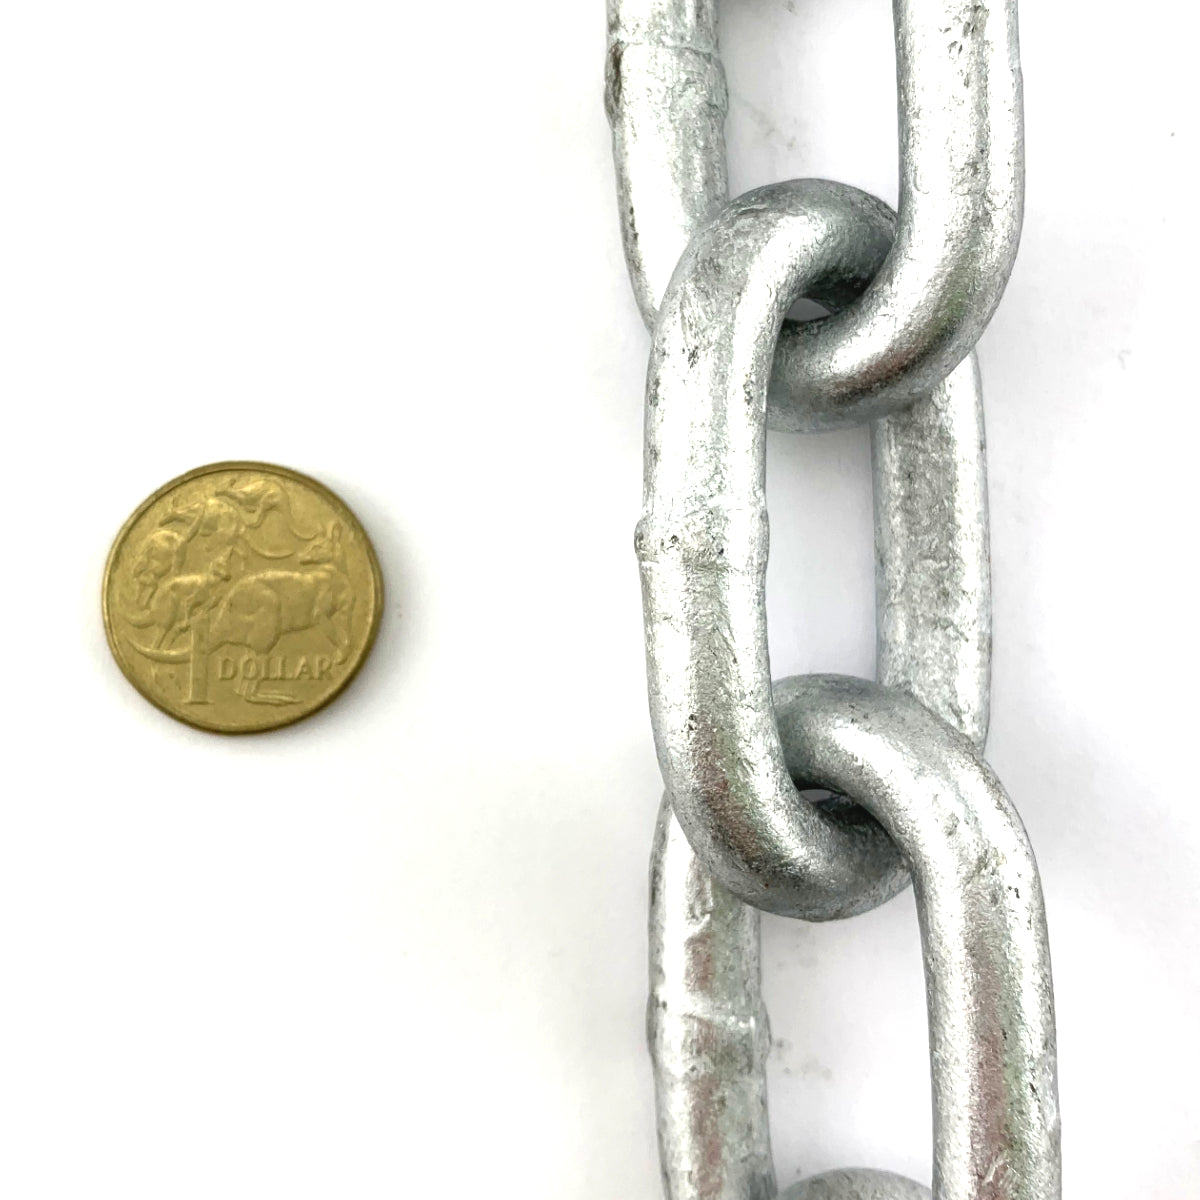 10mm galvanised welded link chain, qty 25kg bucket, approx 13.25 metres. Melbourne, Australia.